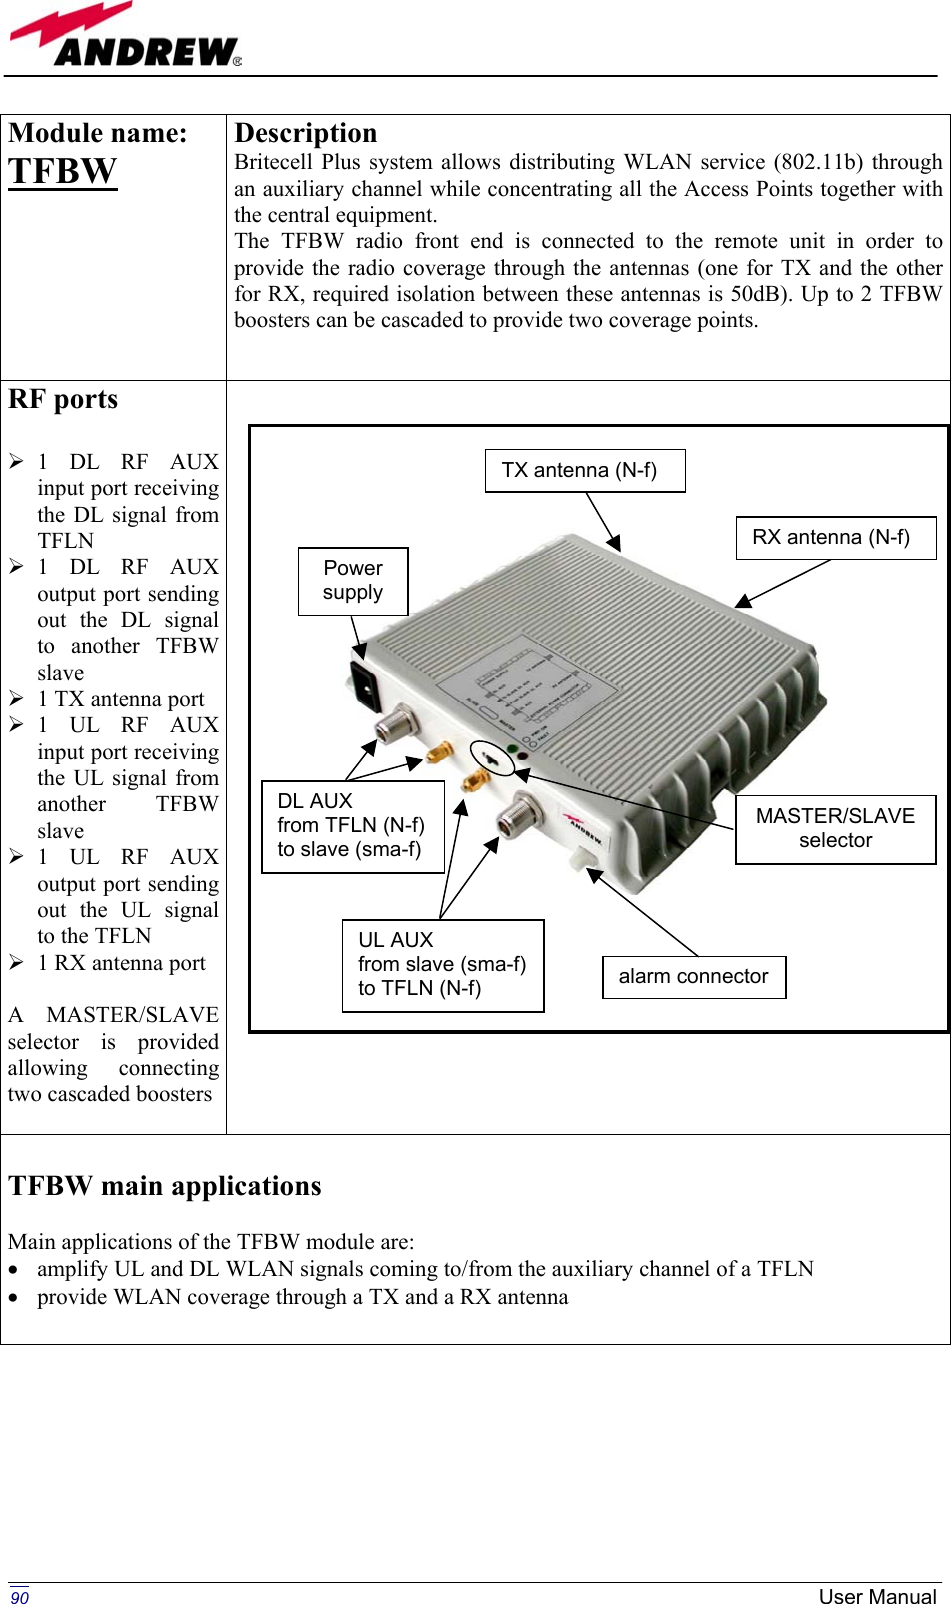   Module name: TFBW Description Britecell Plus system allows distributing WLAN service (802.11b) through an auxiliary channel while concentrating all the Access Points together with the central equipment. The TFBW radio front end is connected to the remote unit in order to provide the radio coverage through the antennas (one for TX and the other for RX, required isolation between these antennas is 50dB). Up to 2 TFBW boosters can be cascaded to provide two coverage points.  RF ports   1 DL RF AUX input port receiving the DL signal from TFLN  1 DL RF AUX output port sending out the DL signal to another TFBW slave  1 TX antenna port   1 UL RF AUX input port receiving the UL signal from another TFBW slave  1 UL RF AUX output port sending out the UL signal to the TFLN  1 RX antenna port  A MASTER/SLAVE selector is provided allowing connecting two cascaded boosters       TFBW main applications  Main applications of the TFBW module are: •  amplify UL and DL WLAN signals coming to/from the auxiliary channel of a TFLN •  provide WLAN coverage through a TX and a RX antenna  TX antenna (N-f) RX antenna (N-f) Power supply DL AUX  from TFLN (N-f)to slave (sma-f)UL AUX  from slave (sma-f)to TFLN (N-f)  alarm connector MASTER/SLAVE selector       90 User Manual